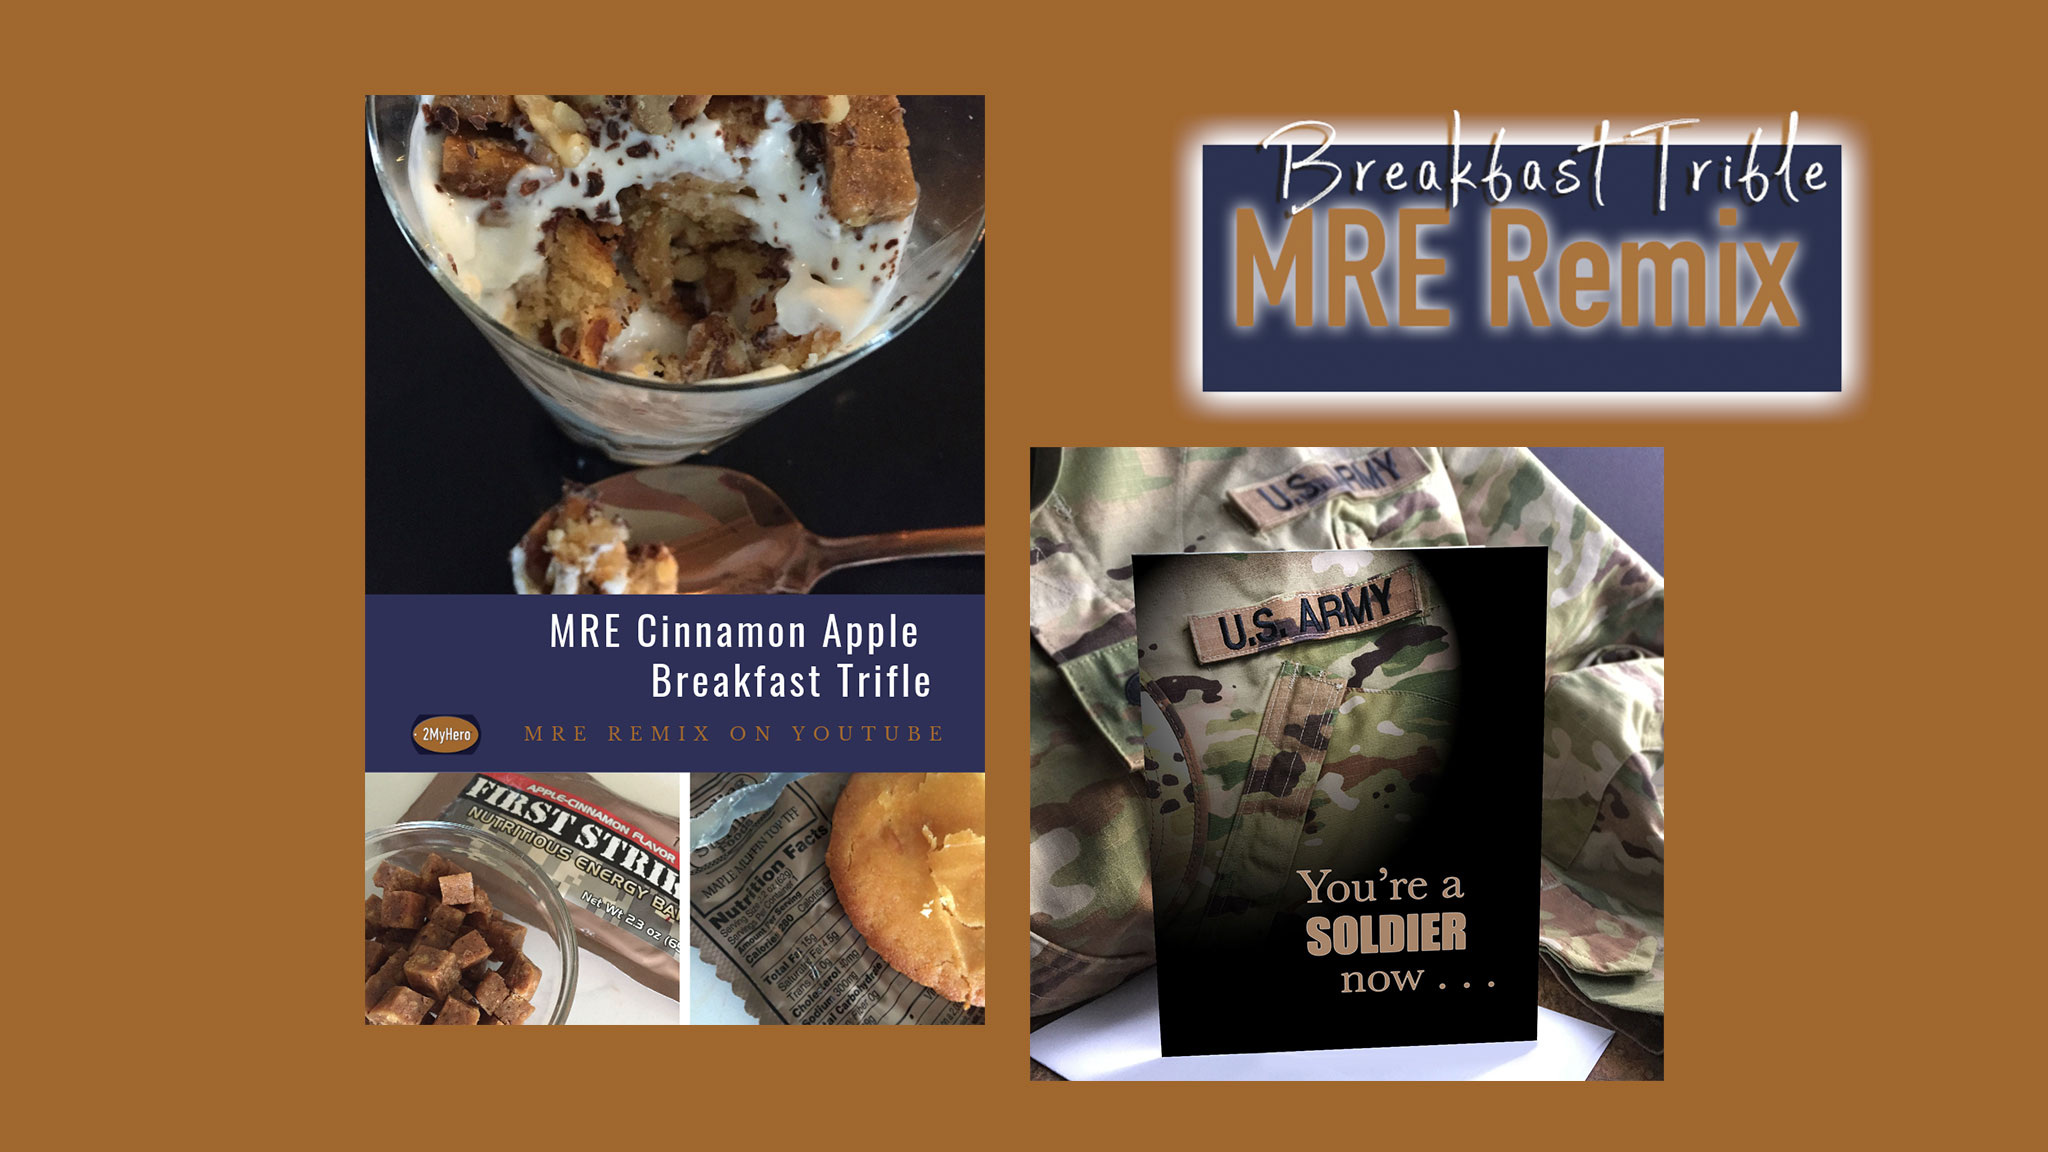 MRE Remix - cooking with MRE's on YouTube by 2MyHero military greeting cards